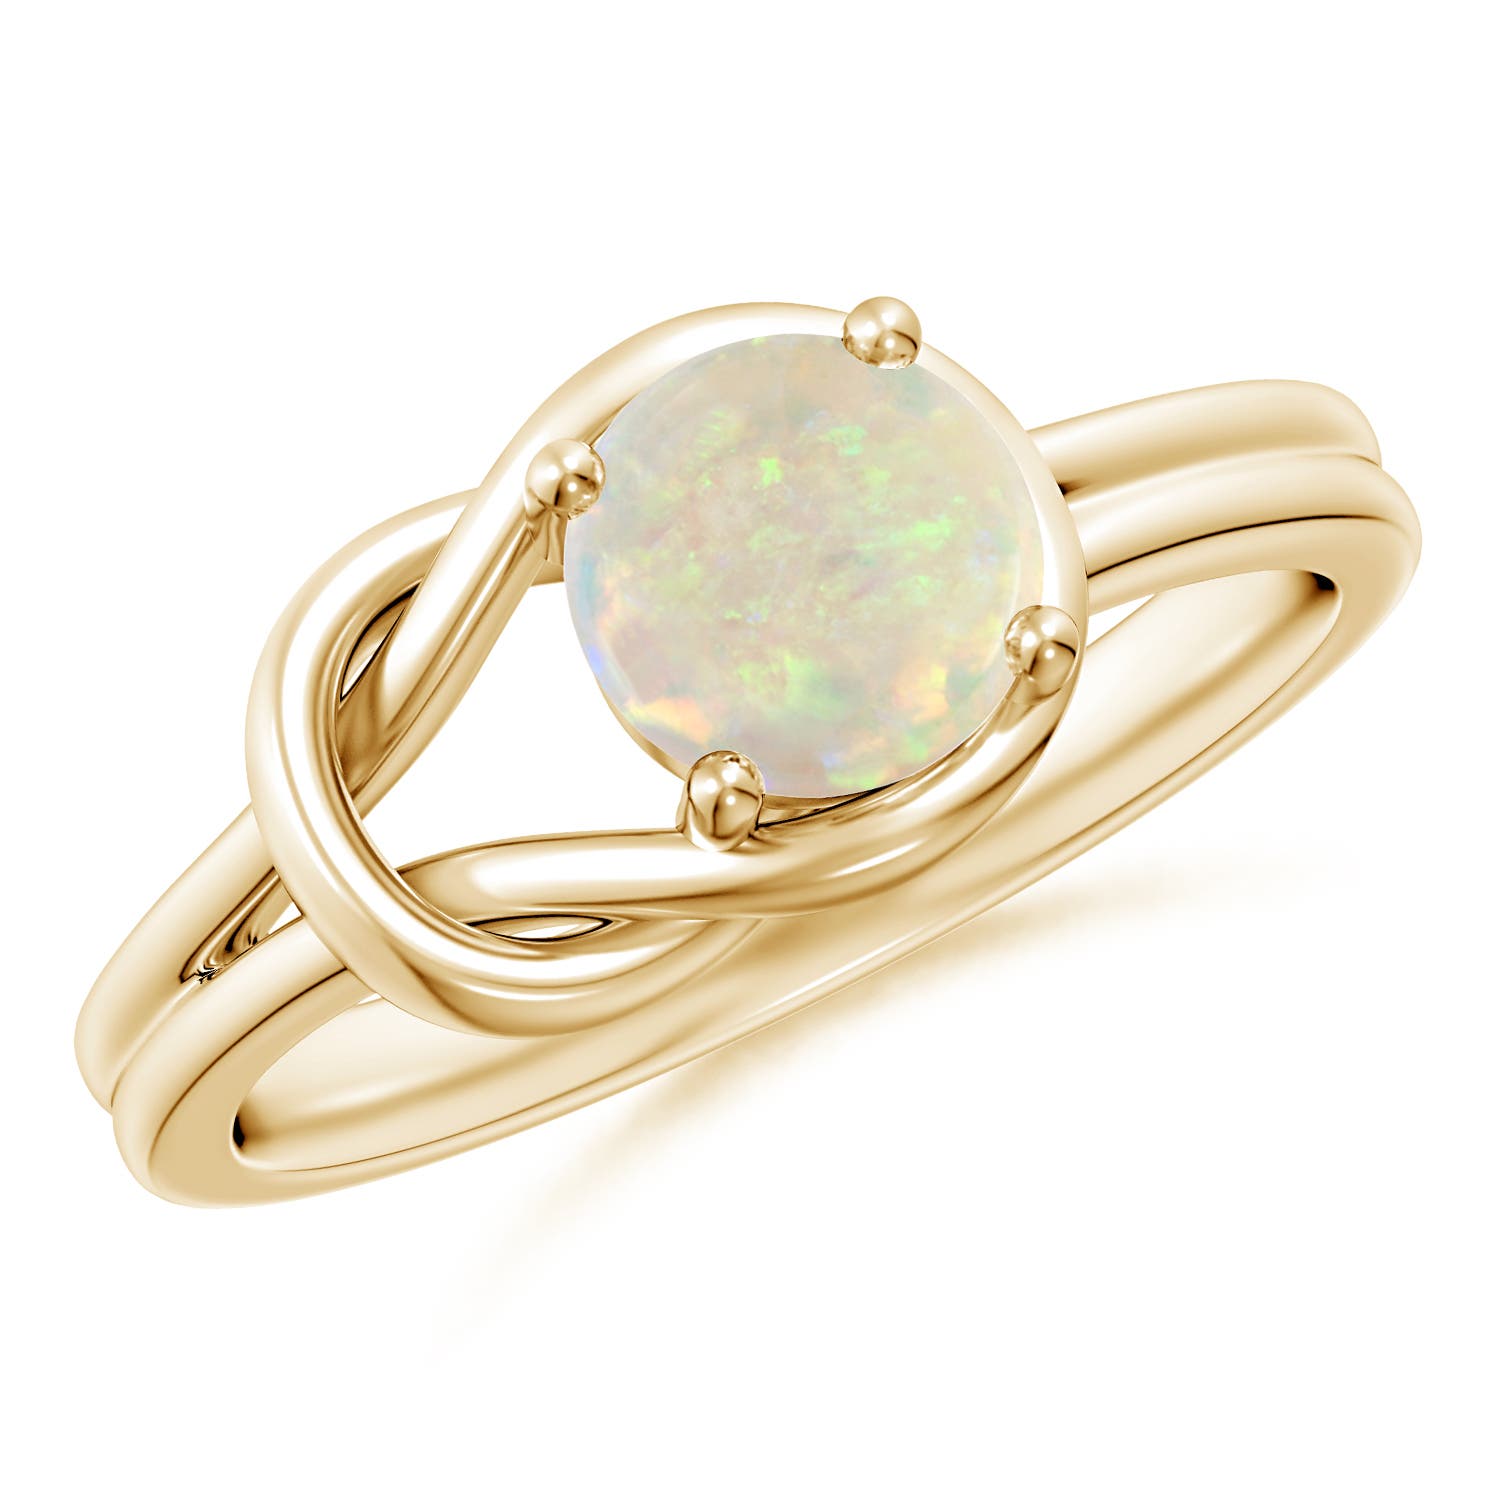 AAA - Opal / 0.5 CT / 14 KT Yellow Gold